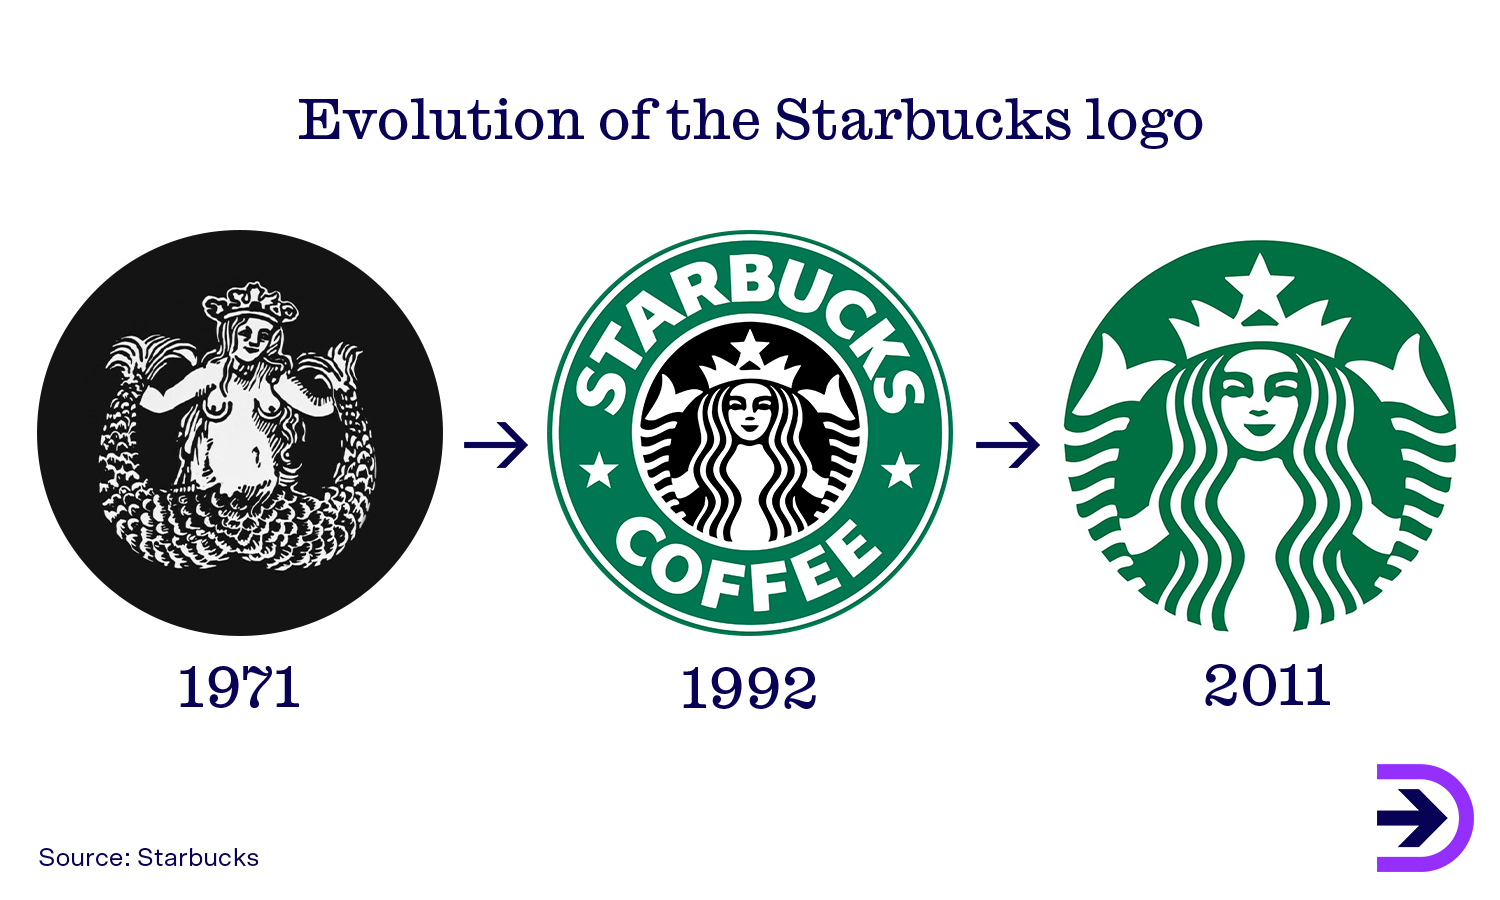 The evolution of the Starbucks logo from a detailed etch to a sleek single-coloured design has given the brand a clear focus that can be utilised across platforms.